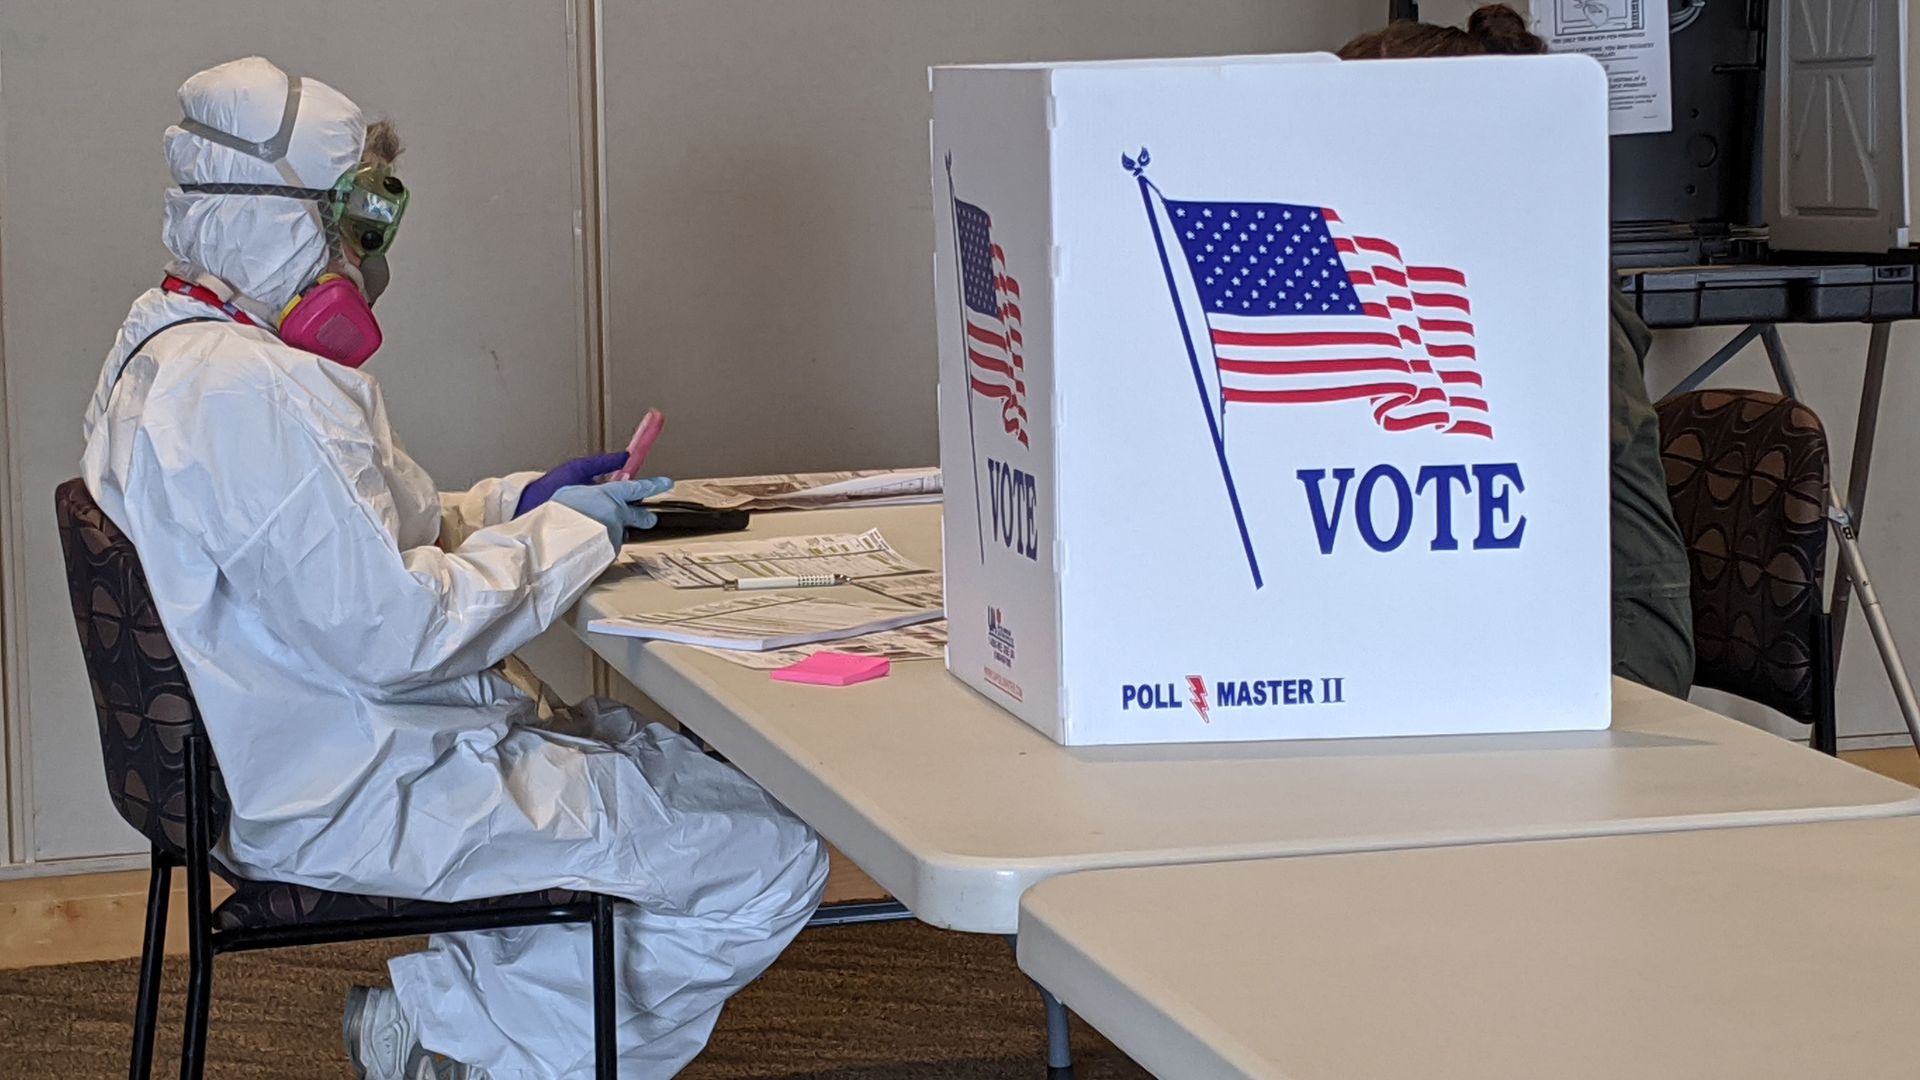 In this image, a person in a hazmat suit and gas mask sits in front of a voting booth